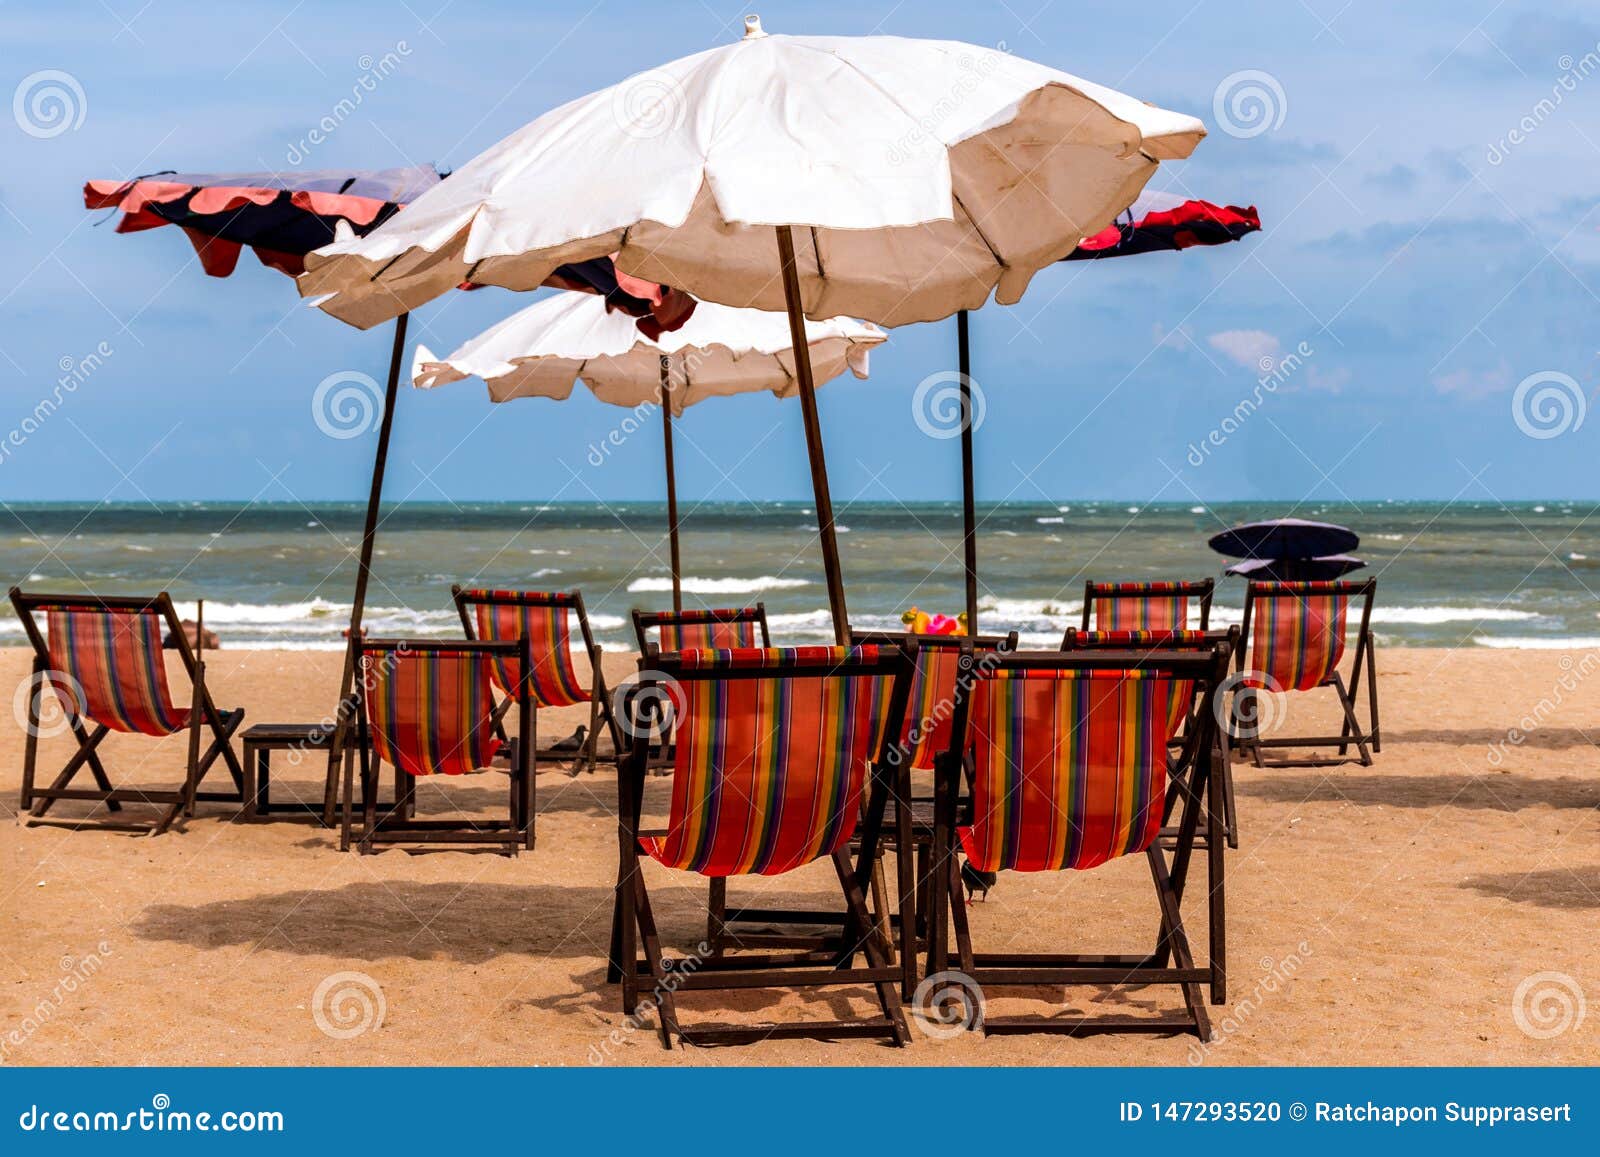 Colorful Beds and Umbrella on a Tropical Beach Stock Photo - Image of ...